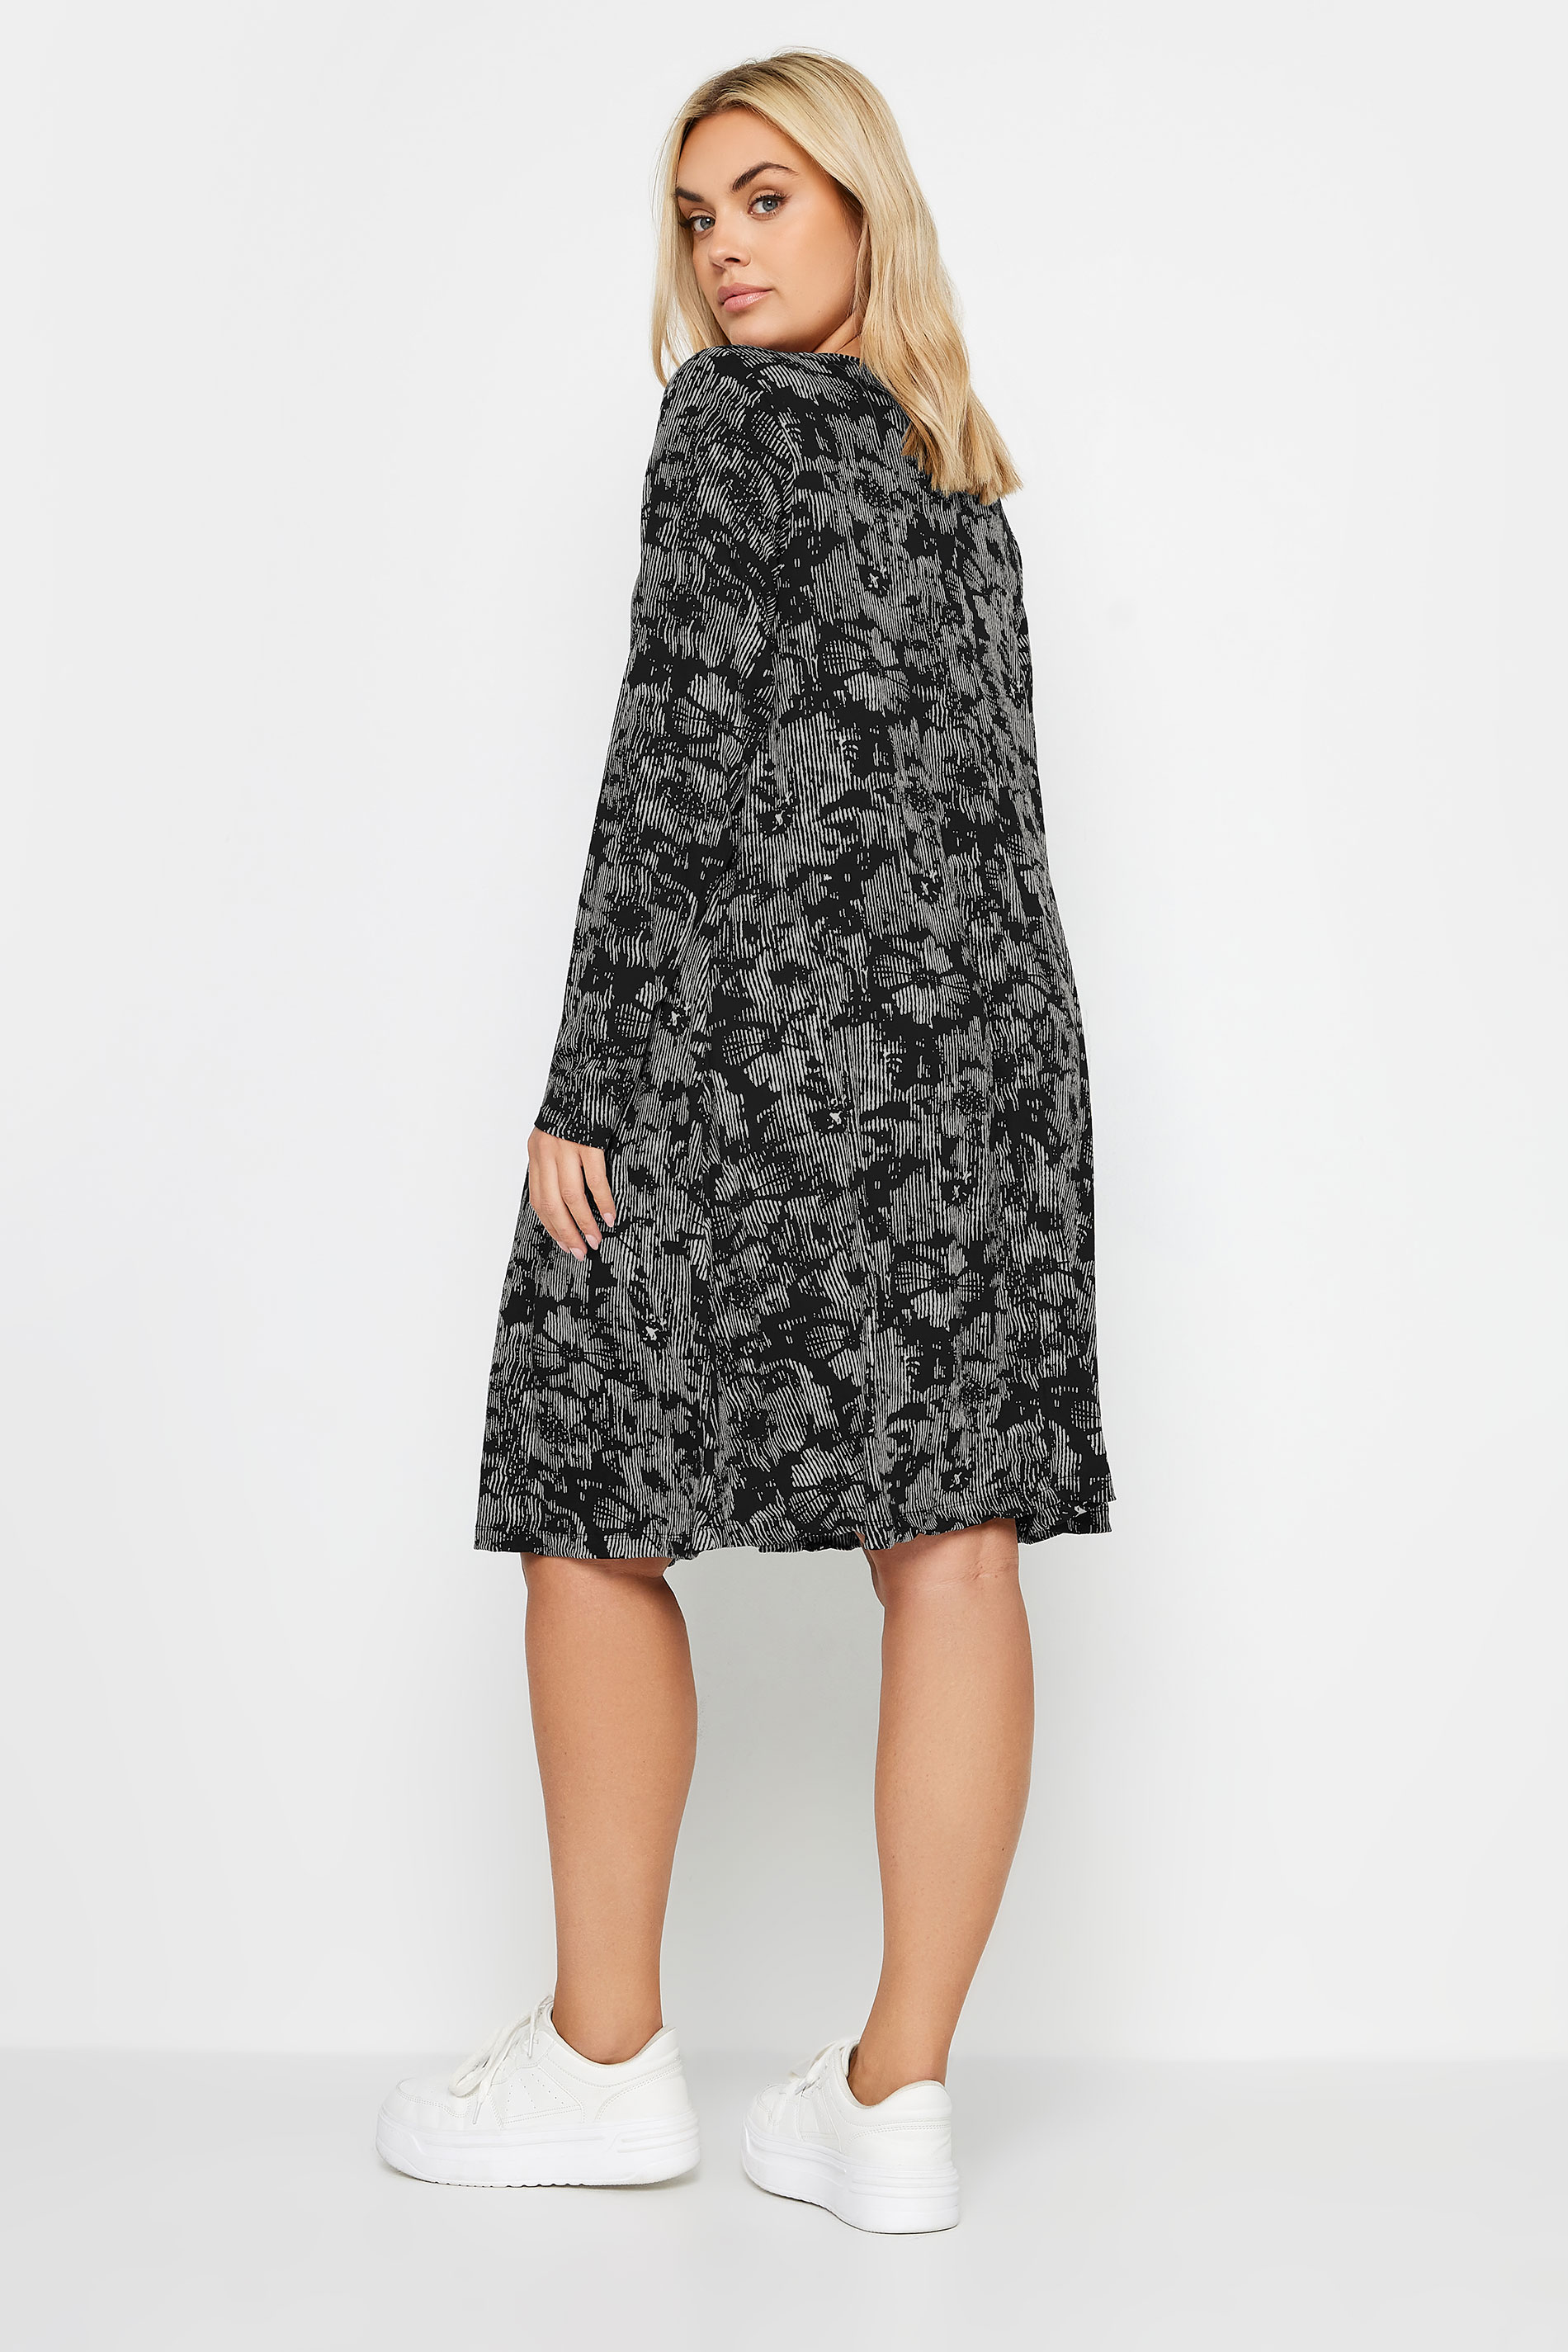 YOURS Plus Size Black Floral Print Pleat Front Midi Dress | Yours Clothing 3